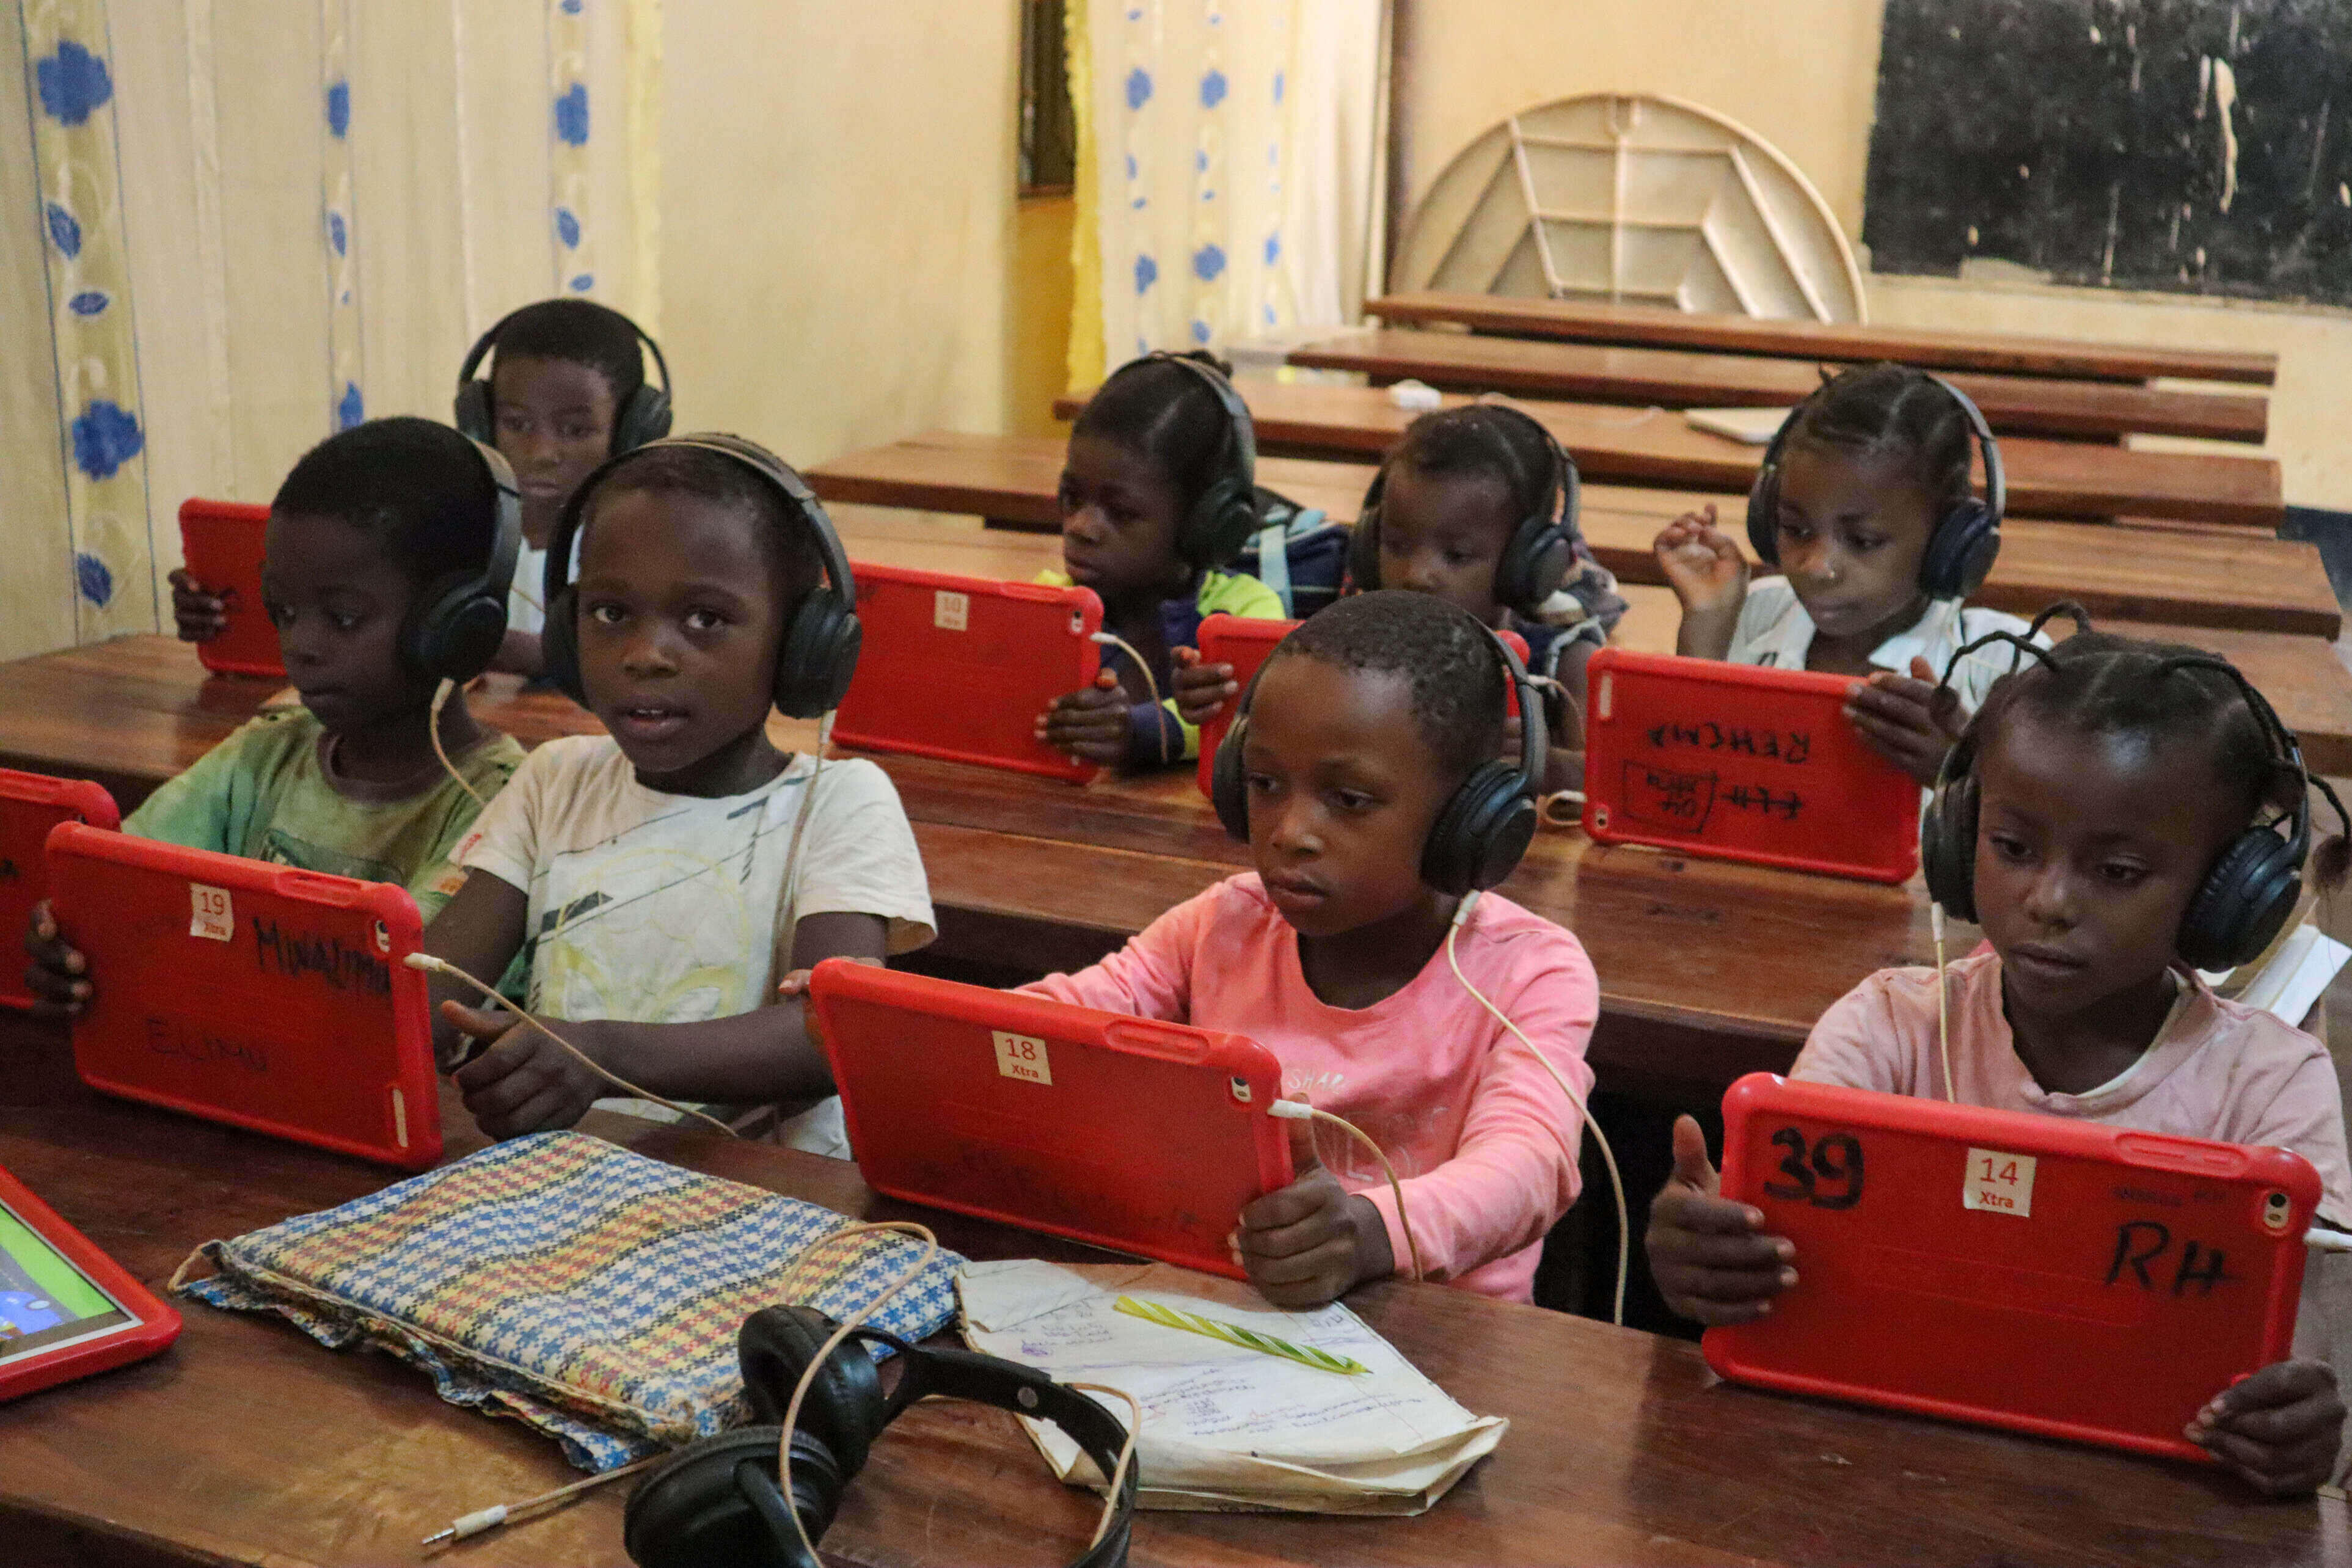 Schoolchildren in the Democratic Republic of Congo who receive support from the IRC use tablets that came as part of a classroom-in-a-box program funded by Vodaphone in collaboration with the UN Refugee Agency (UNHCR). Photo: Abbas Placide